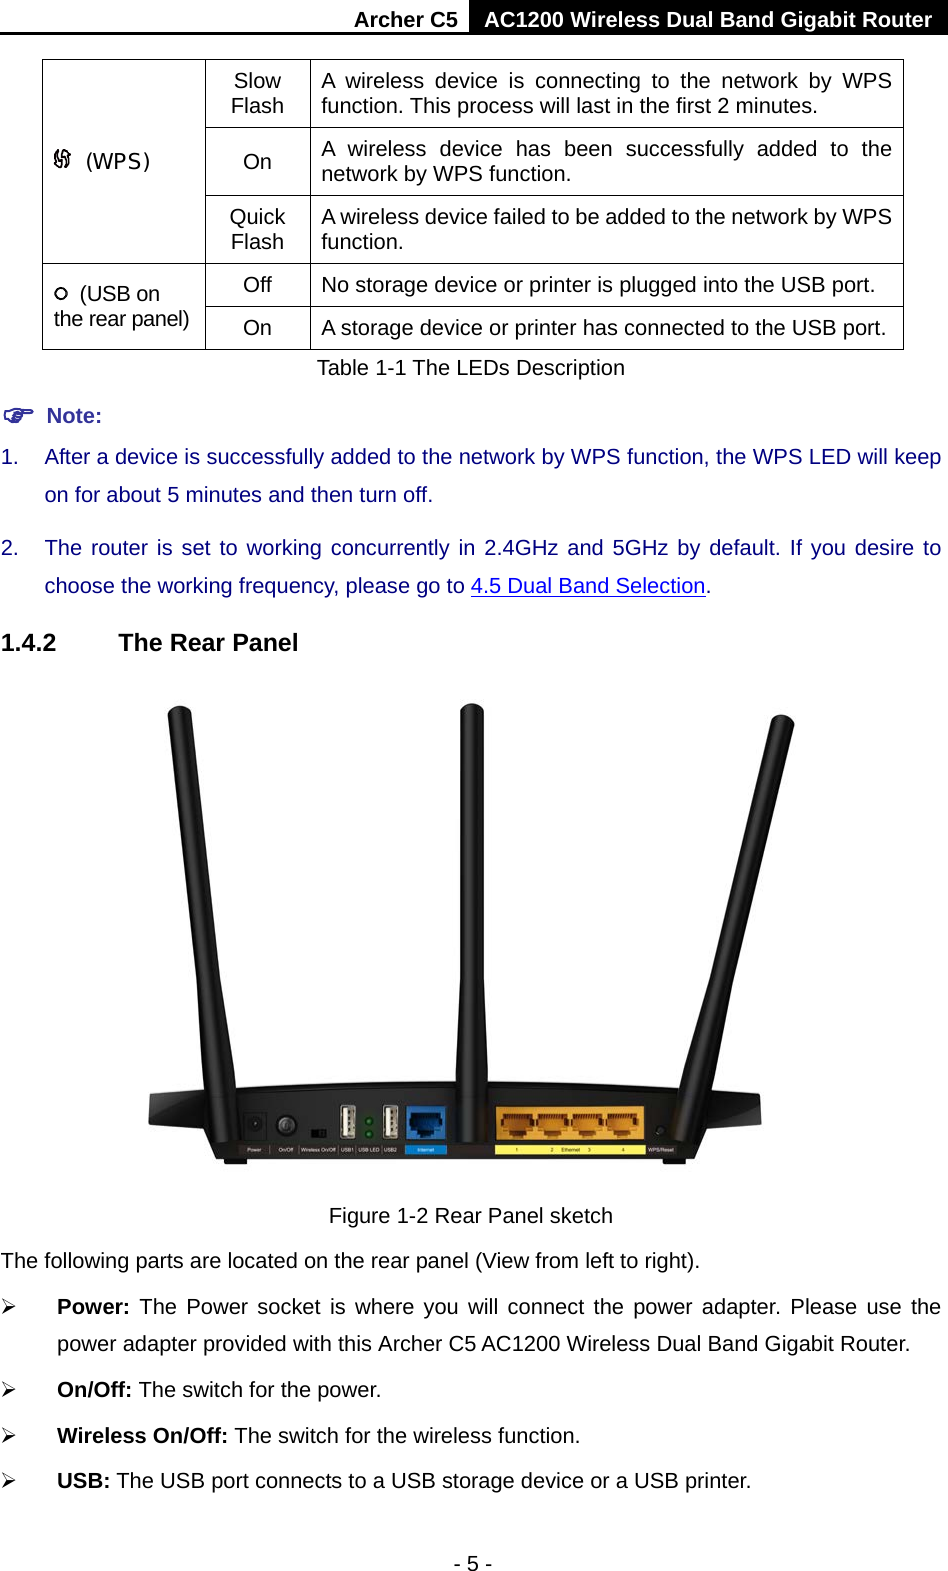 Archer C5 AC1200 Wireless Dual Band Gigabit Router  - 5 -   (WPS) Slow Flash A  wireless  device is connecting to the network by WPS function. This process will last in the first 2 minutes. On A  wireless  device has been successfully added to the network by WPS function.   Quick Flash A wireless device failed to be added to the network by WPS function.   (USB on the rear panel) Off No storage device or printer is plugged into the USB port. On A storage device or printer has connected to the USB port.  Table 1-1 The LEDs Description  Note: 1. After a device is successfully added to the network by WPS function, the WPS LED will keep on for about 5 minutes and then turn off.   2. The router is set to working concurrently in 2.4GHz and 5GHz by default. If you desire to choose the working frequency, please go to 4.5 Dual Band Selection. 1.4.2 The Rear Panel  Figure 1-2 Rear Panel sketch The following parts are located on the rear panel (View from left to right).  Power: The Power socket is where you will connect the power adapter.  Please use the power adapter provided with this Archer C5 AC1200 Wireless Dual Band Gigabit Router.  On/Off: The switch for the power.  Wireless On/Off: The switch for the wireless function.  USB: The USB port connects to a USB storage device or a USB printer. 